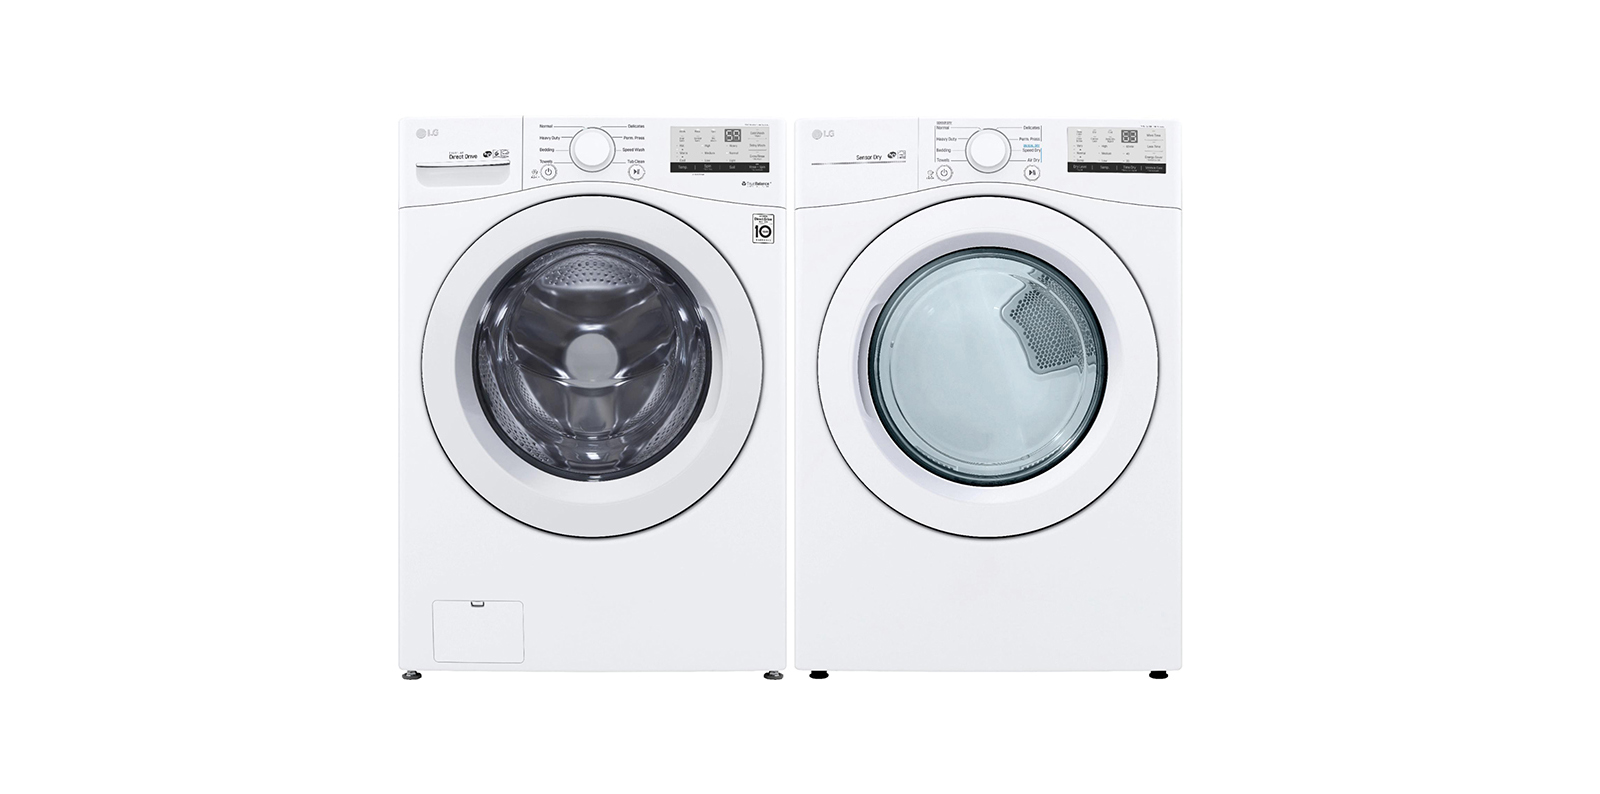 LG  Smart Washer and Dryer | MK Joy at Moreno Valley Mall